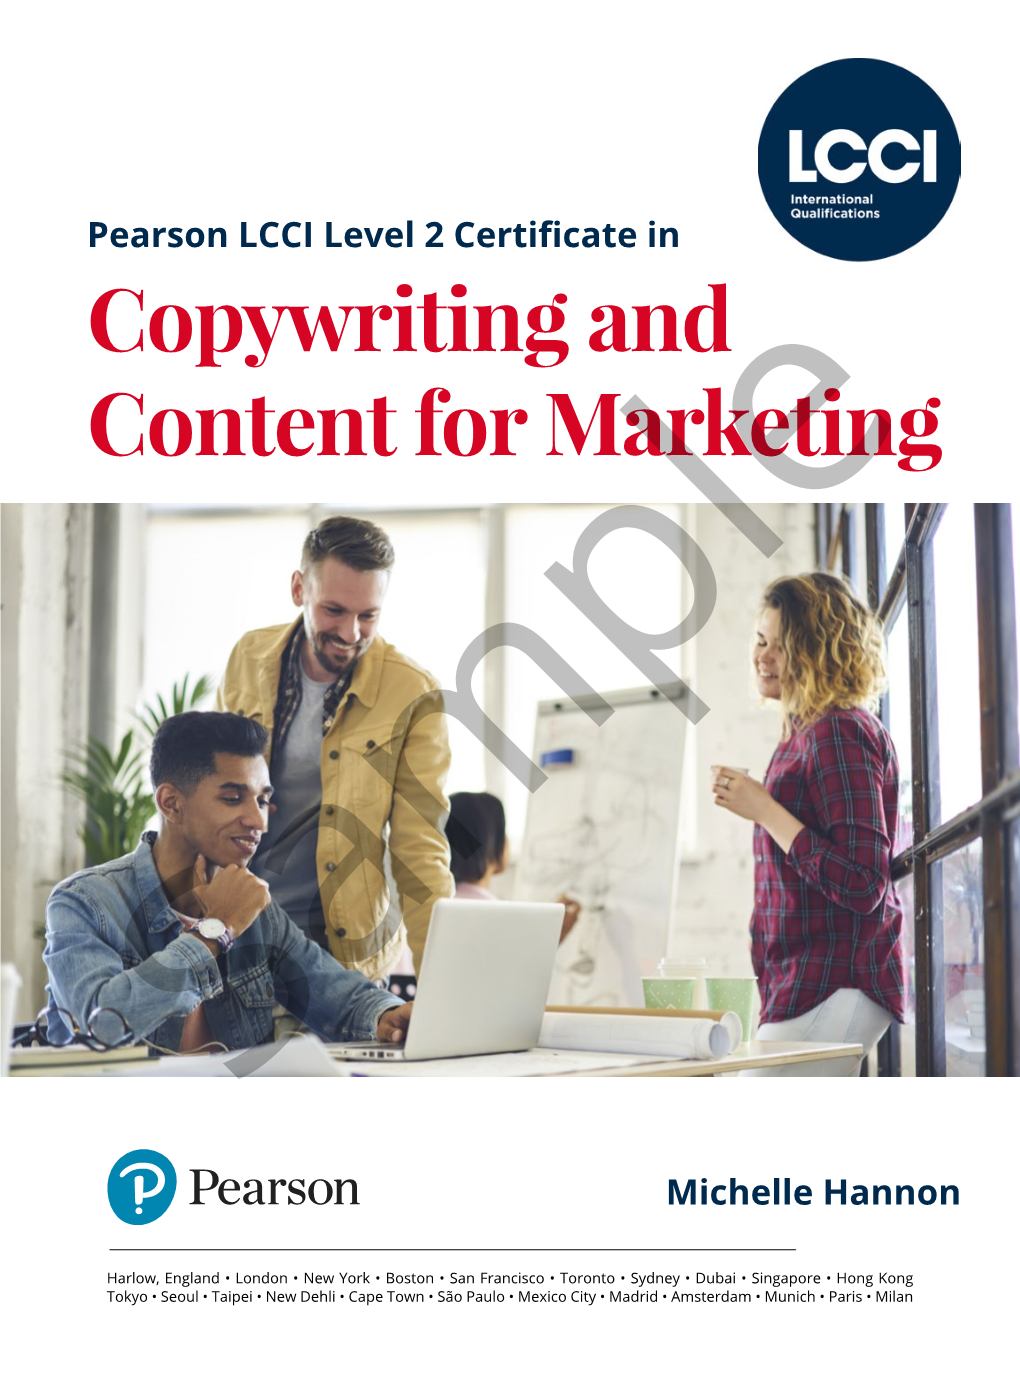 LCCI L2 Certificate in Copywriting and Content for Marketing